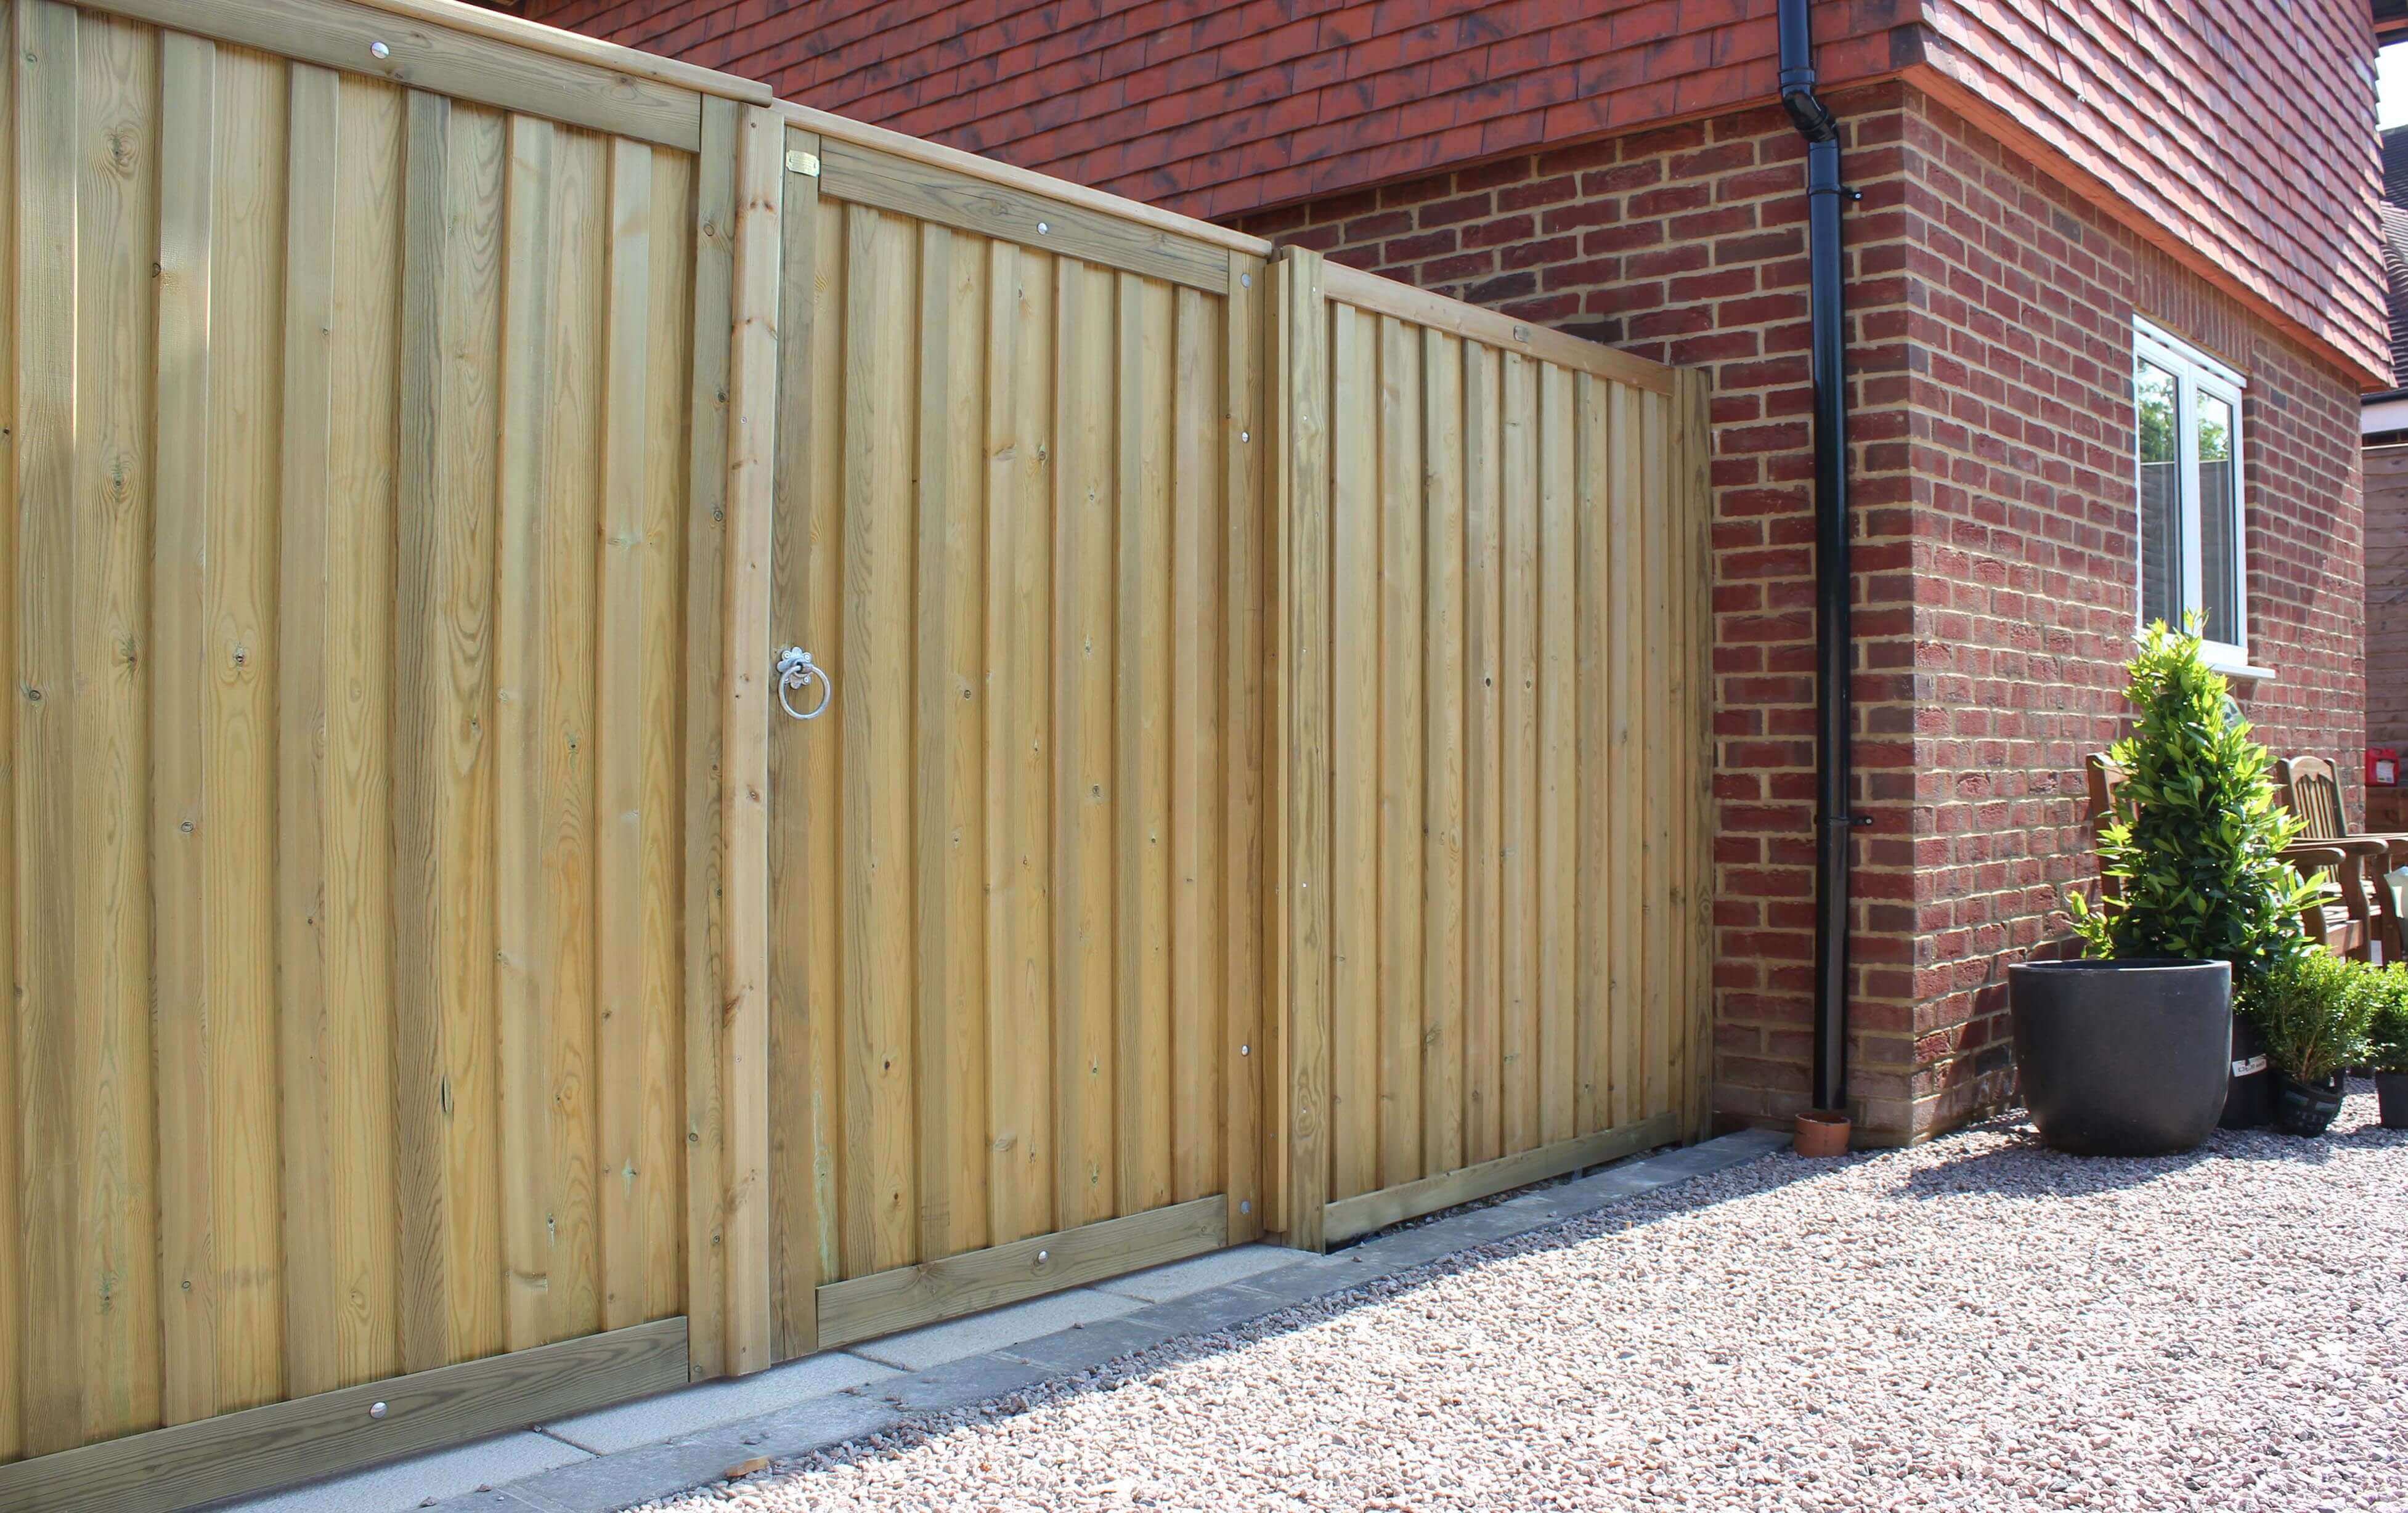 Timber chilham Fence panels and garden gate